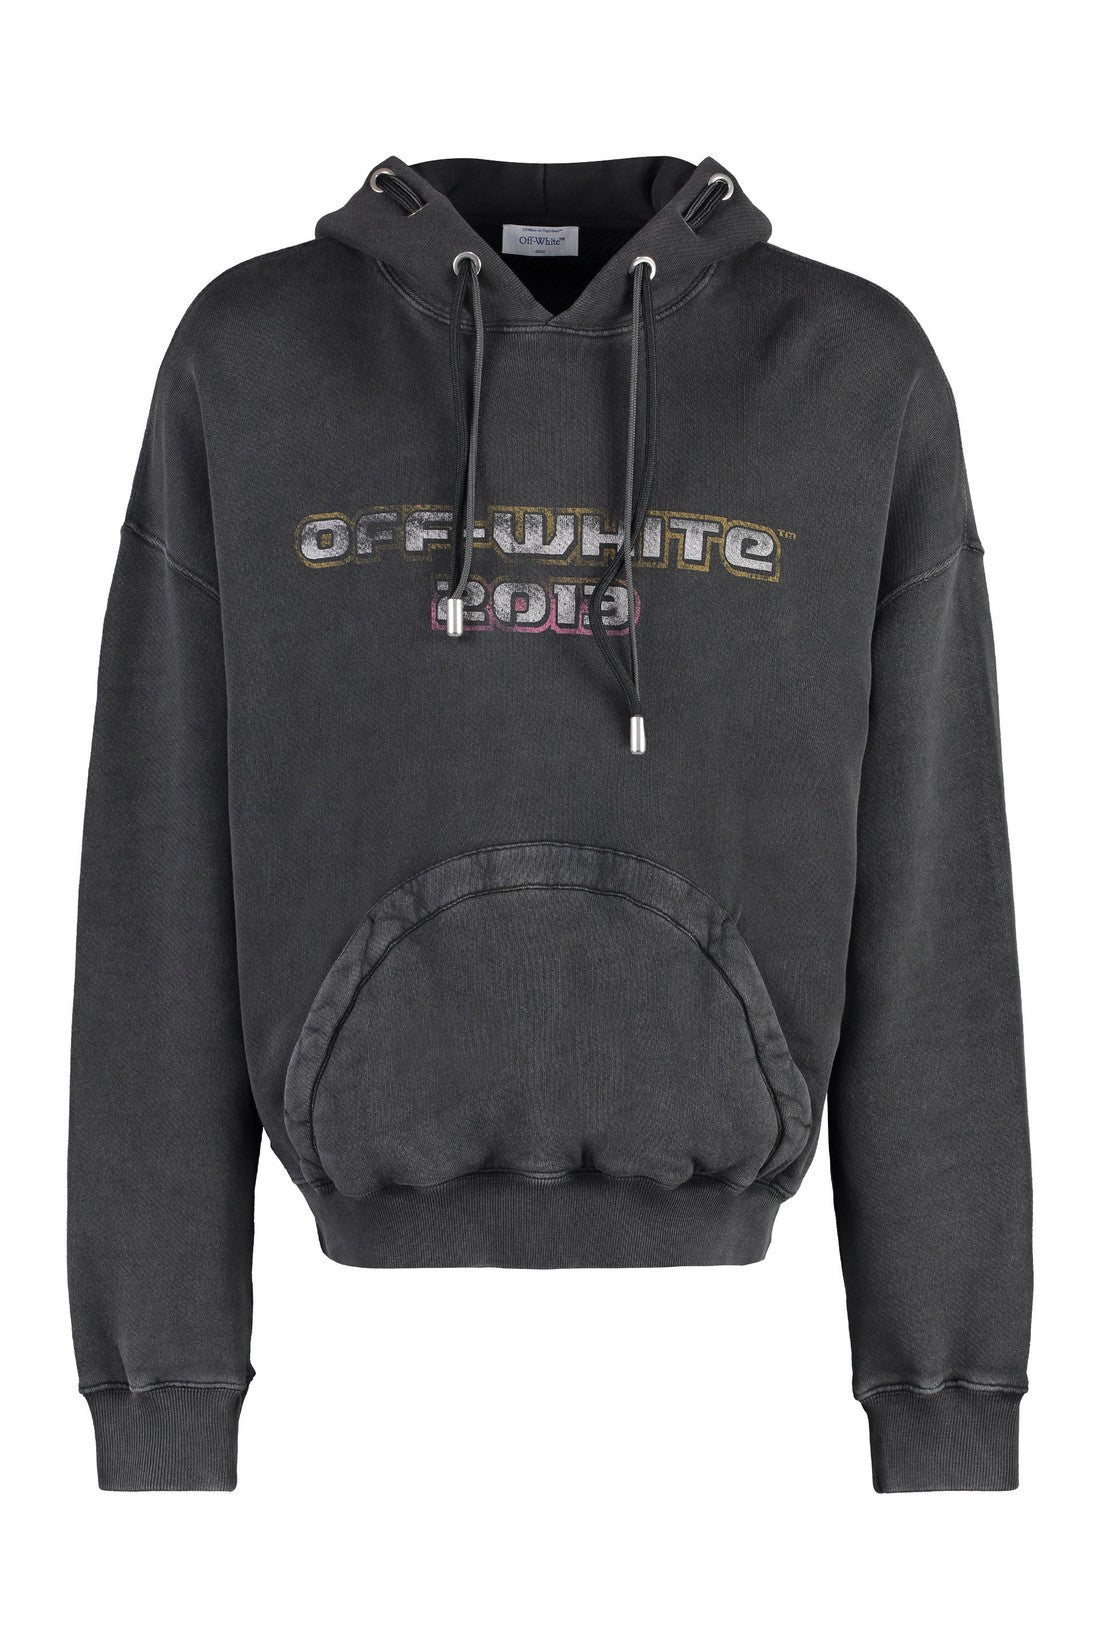 Off-White-OUTLET-SALE-Logo print hoodie-ARCHIVIST